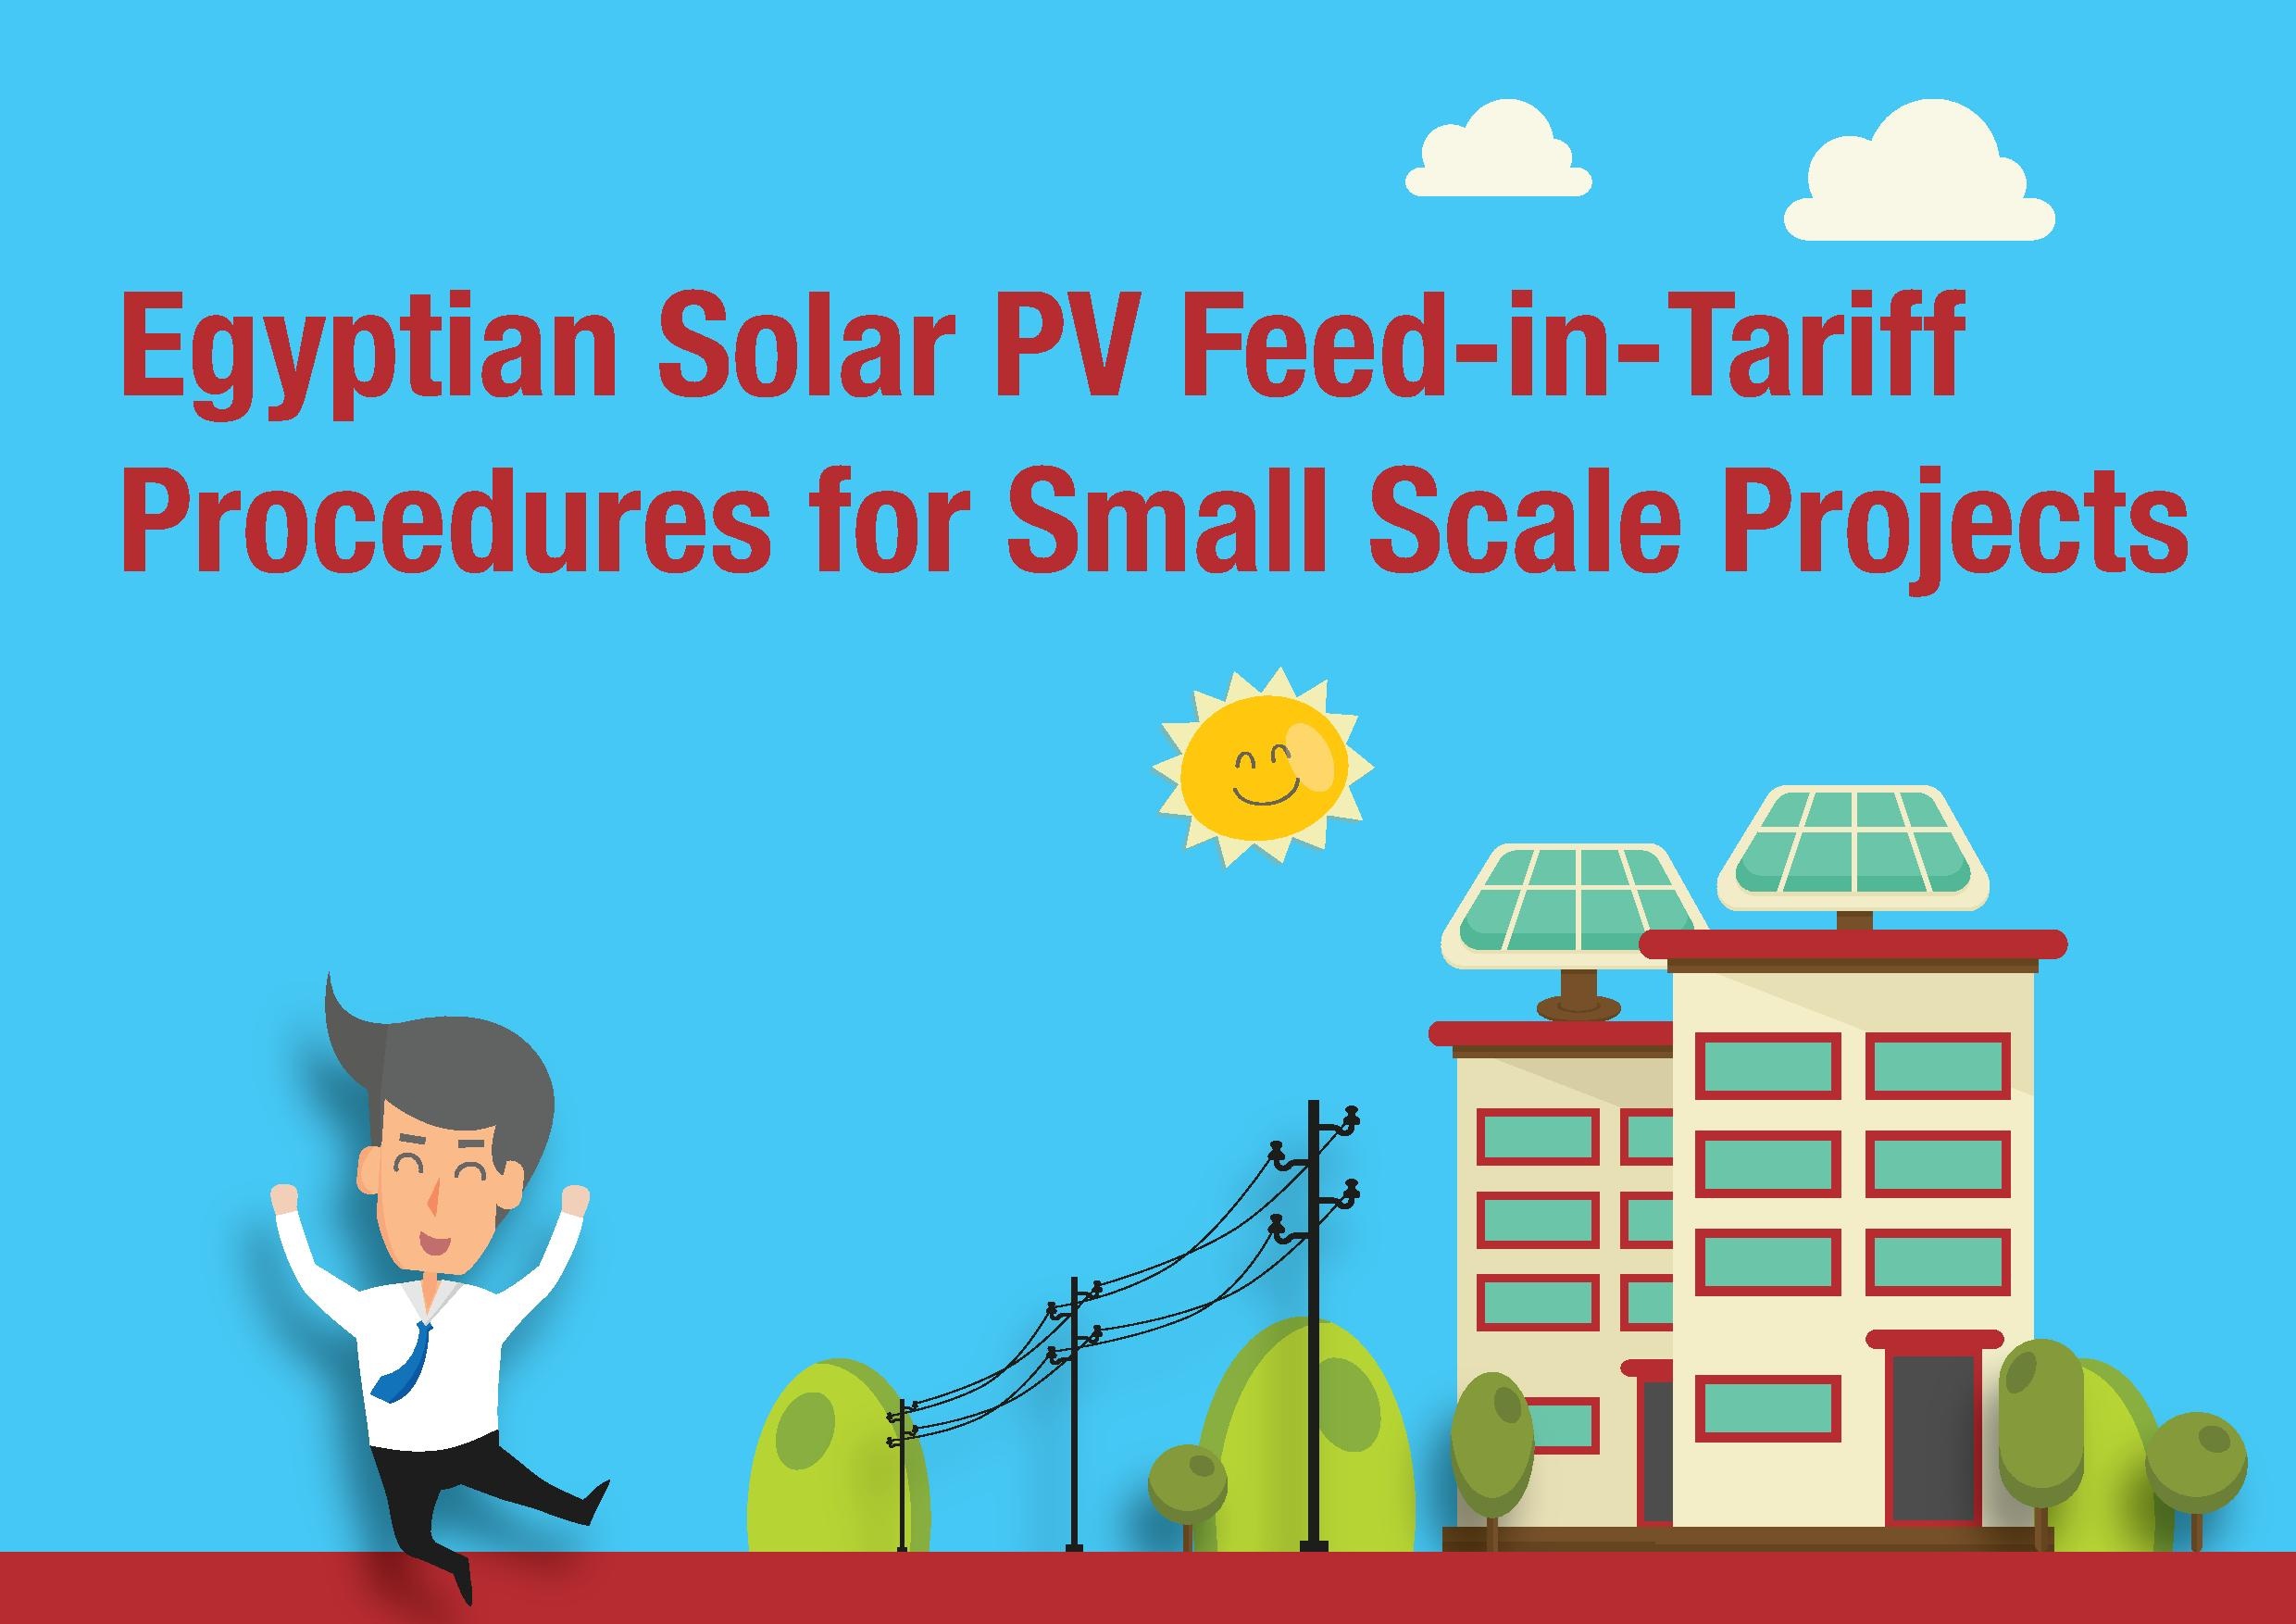 Practical Guidelines on Small- to Medium-Sized Solar PV Hybrid Systems for Off-Grid Facilities